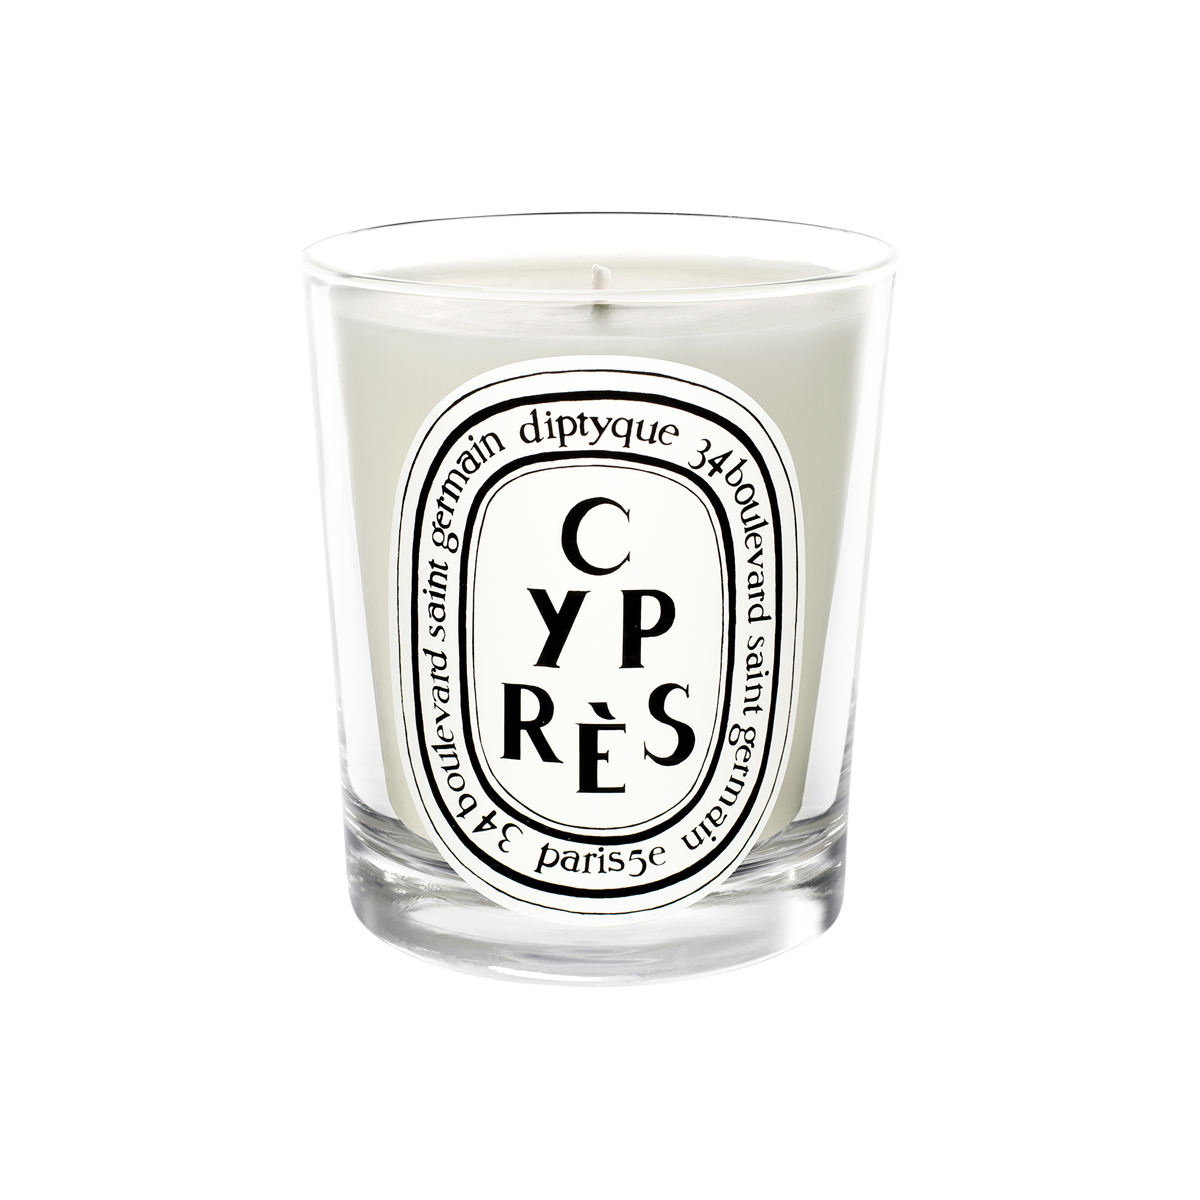 Diptyque - Cypres Scented Candle